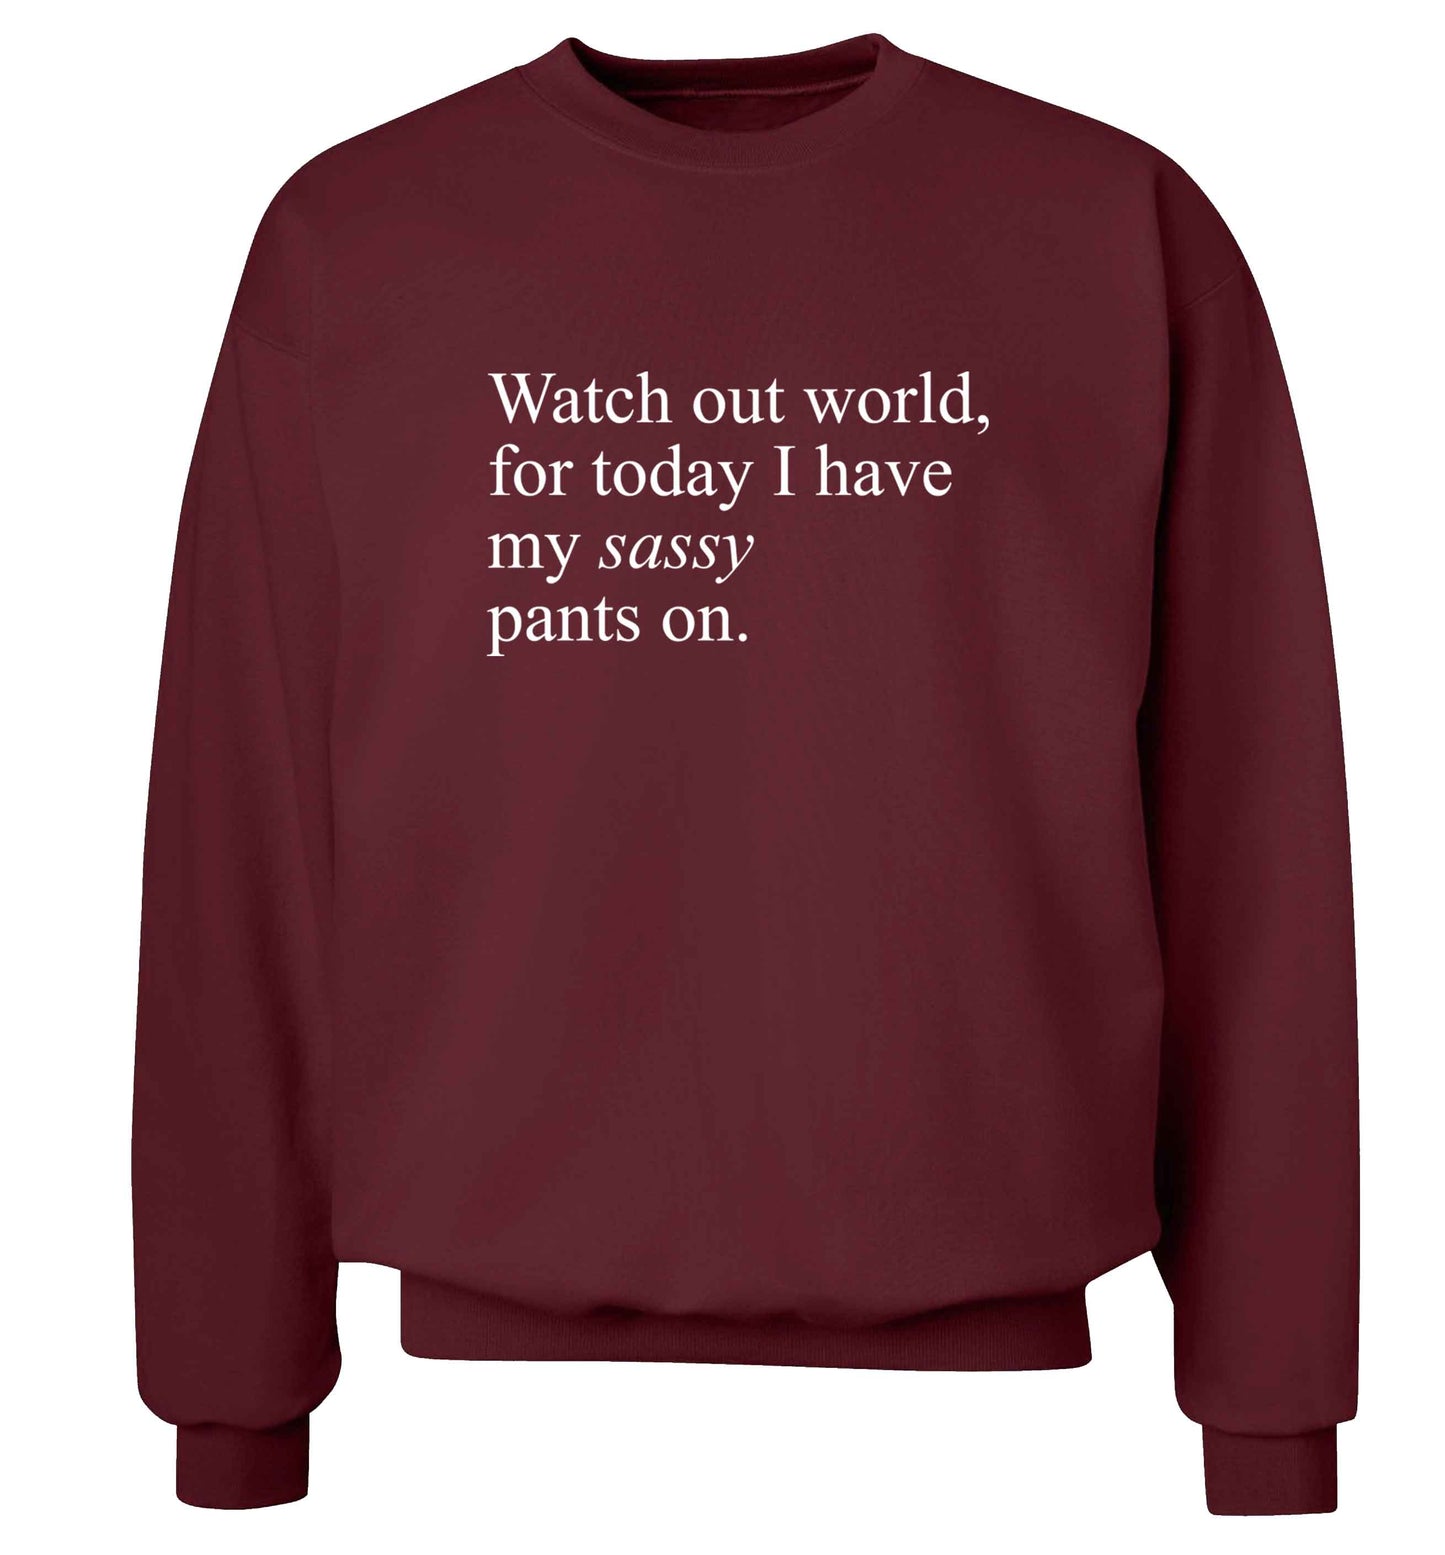 Watch out world for today I have my sassy pants on adult's unisex maroon sweater 2XL